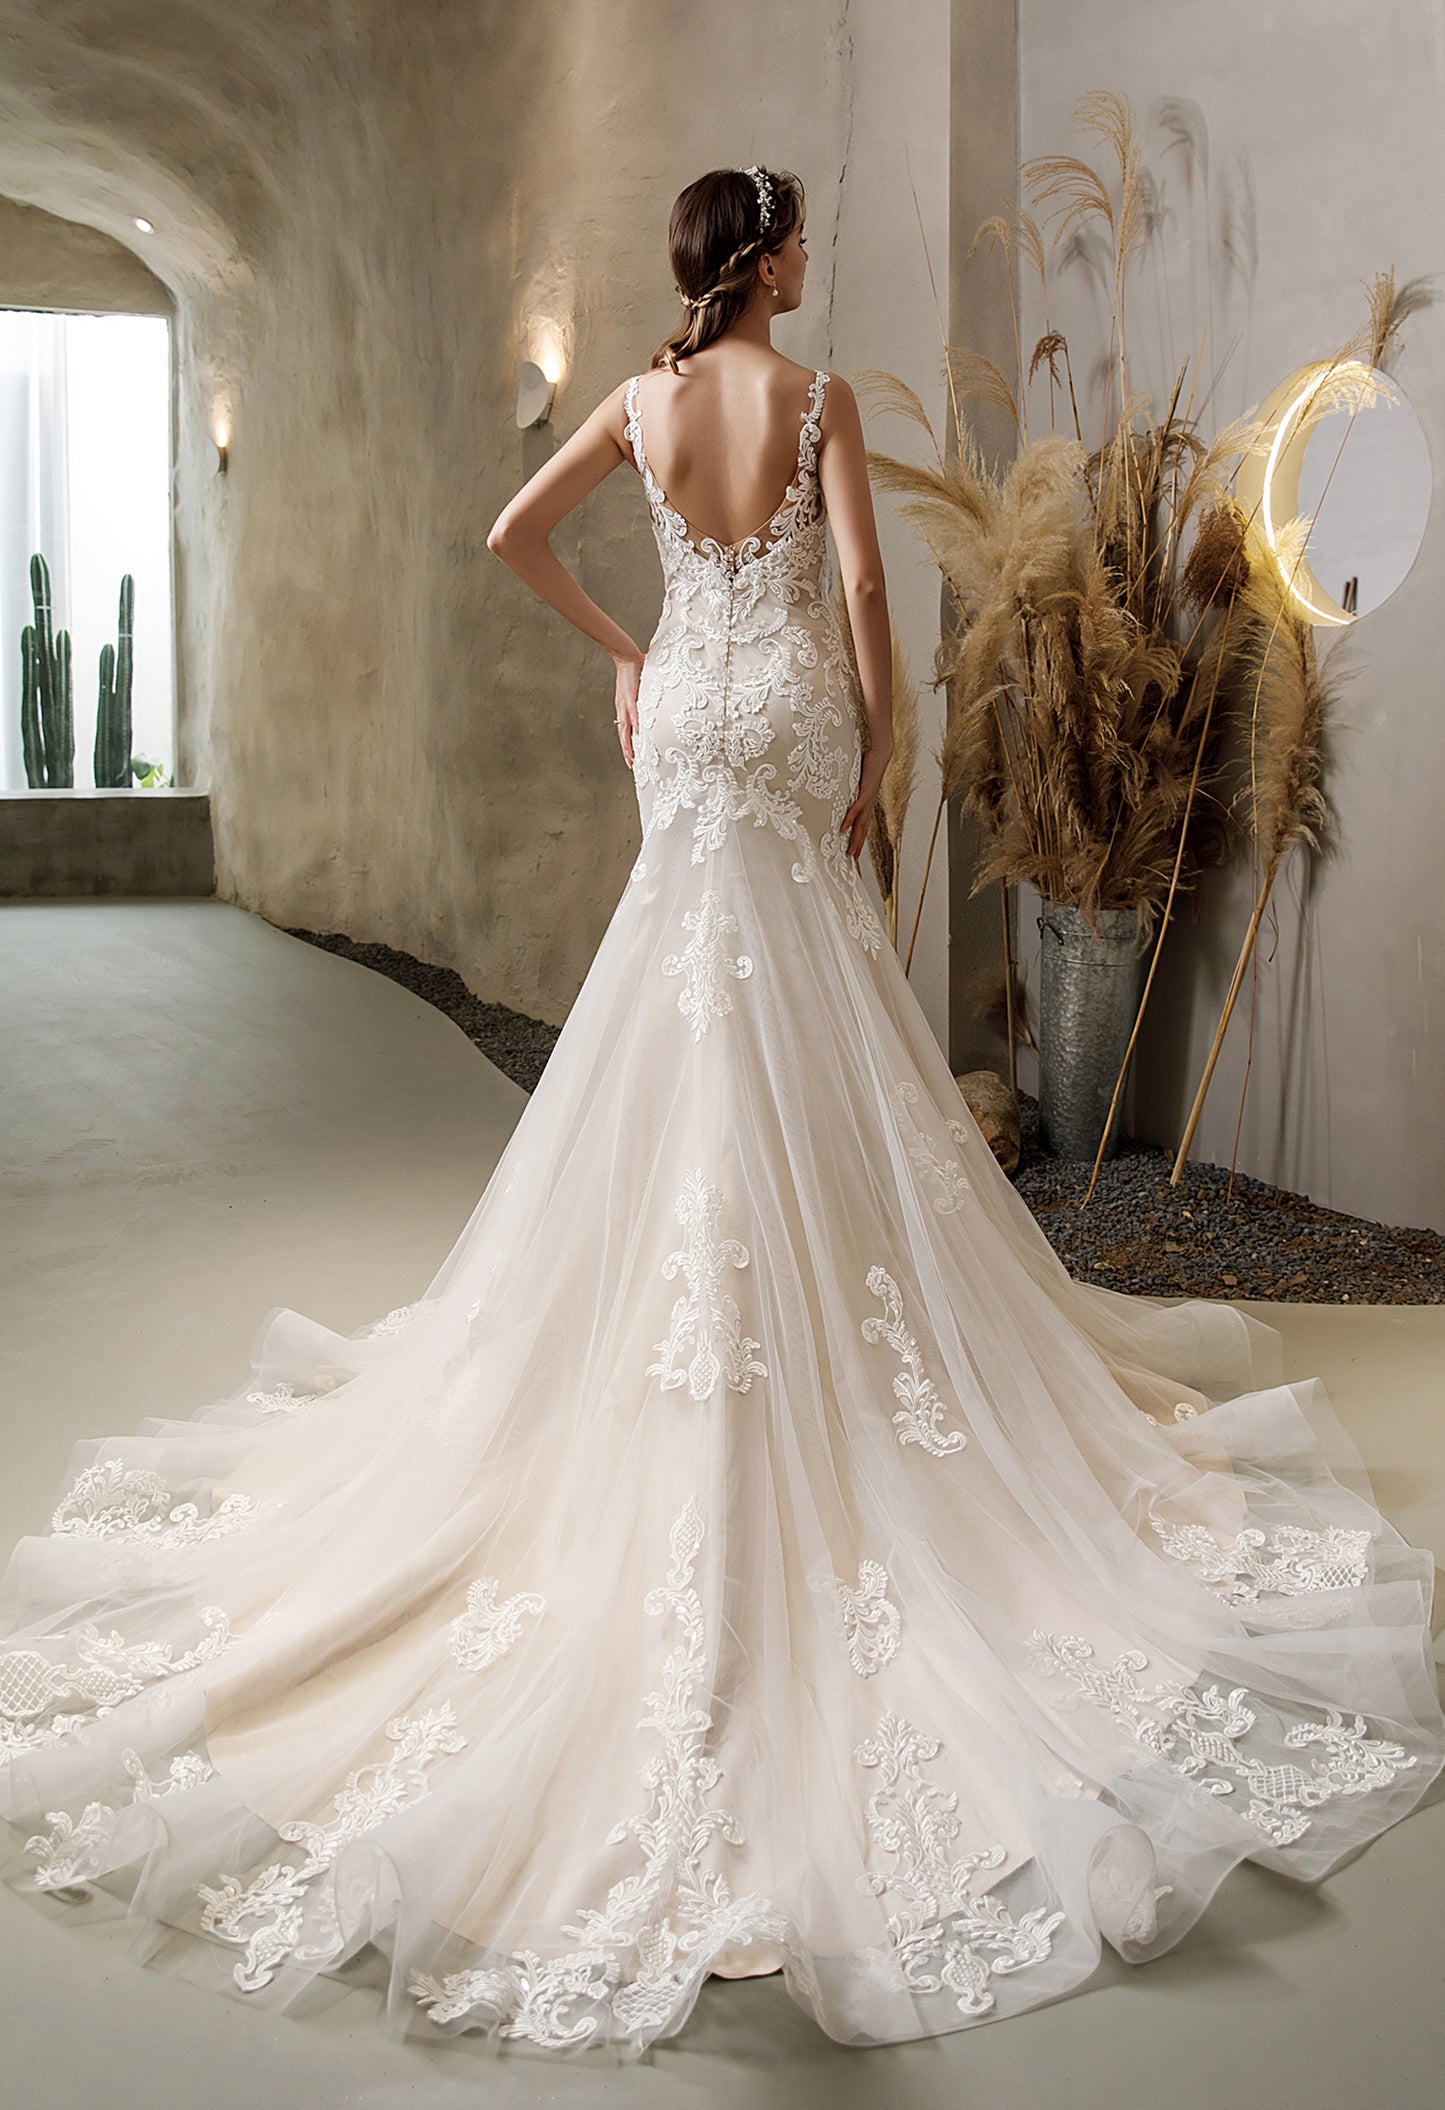 Alayah 2530: Sophisticated Fit and Flare Wedding Dress